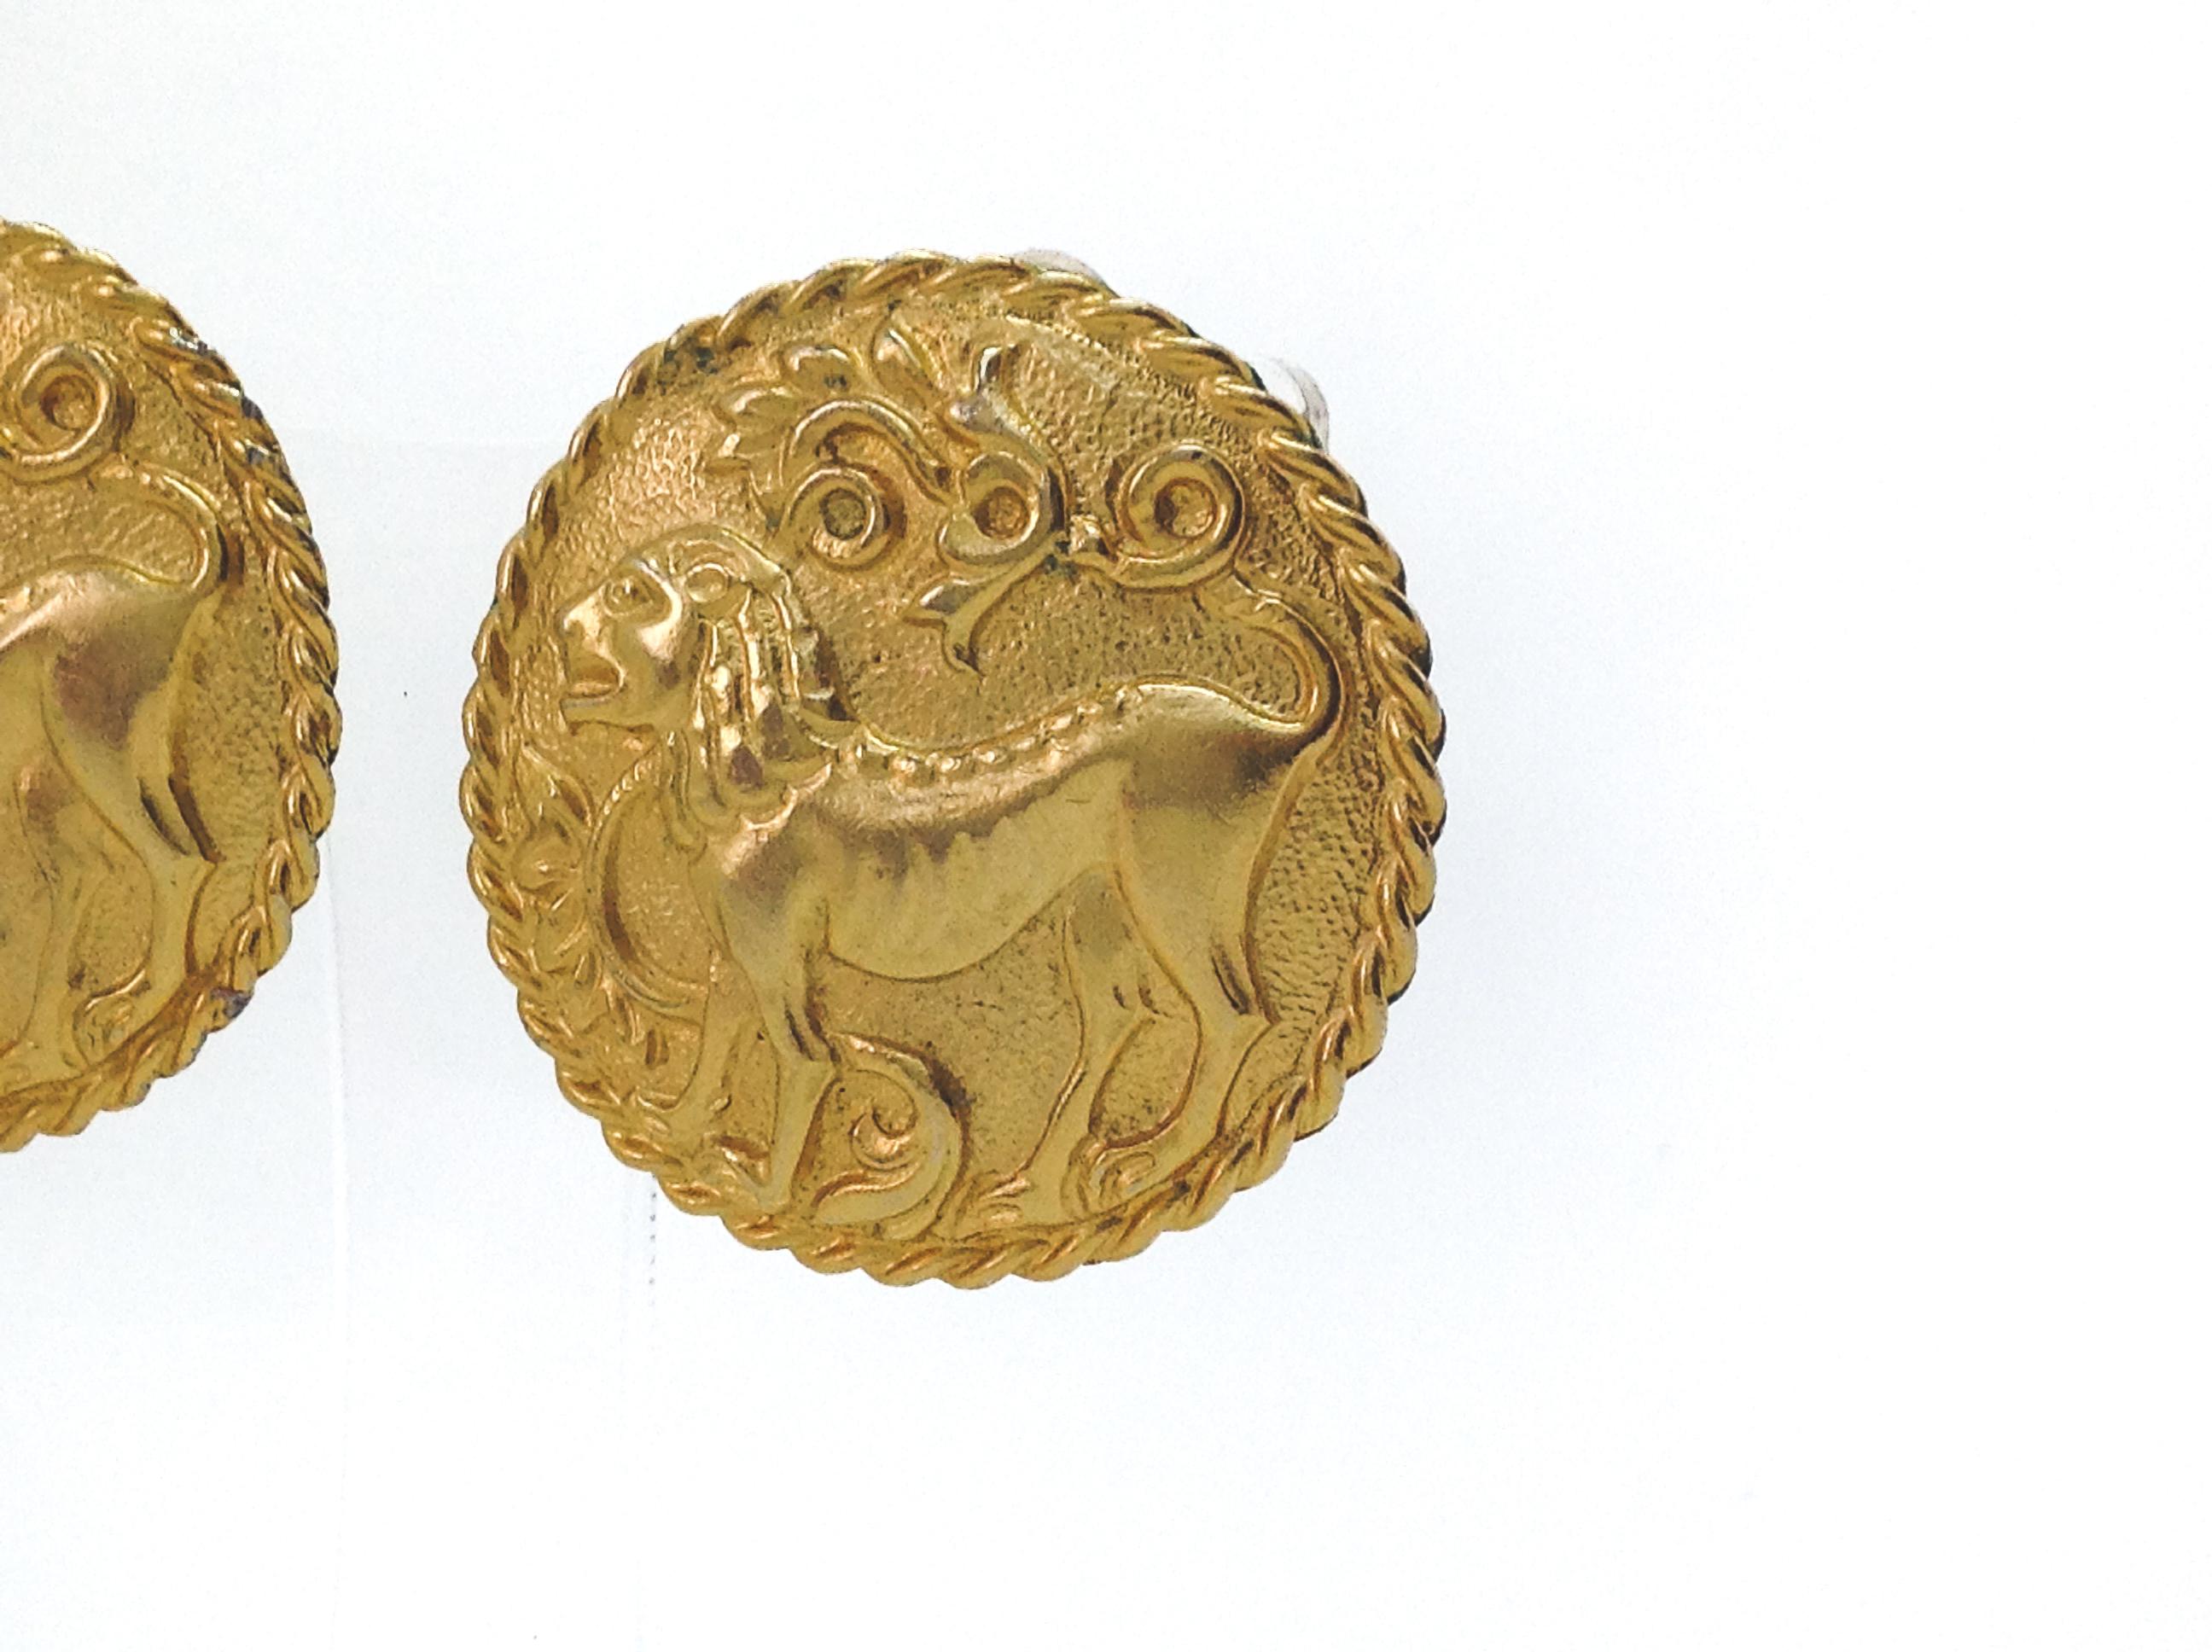 Les Bernard 1980s Vintage Clip on Earrings

Fantastic statement earrings from Les Bernard, the designer of jewellery for Alexis Carrington herself! These are iconic earrings of the era. Bold Roman style medallions embossed with lions.  For power